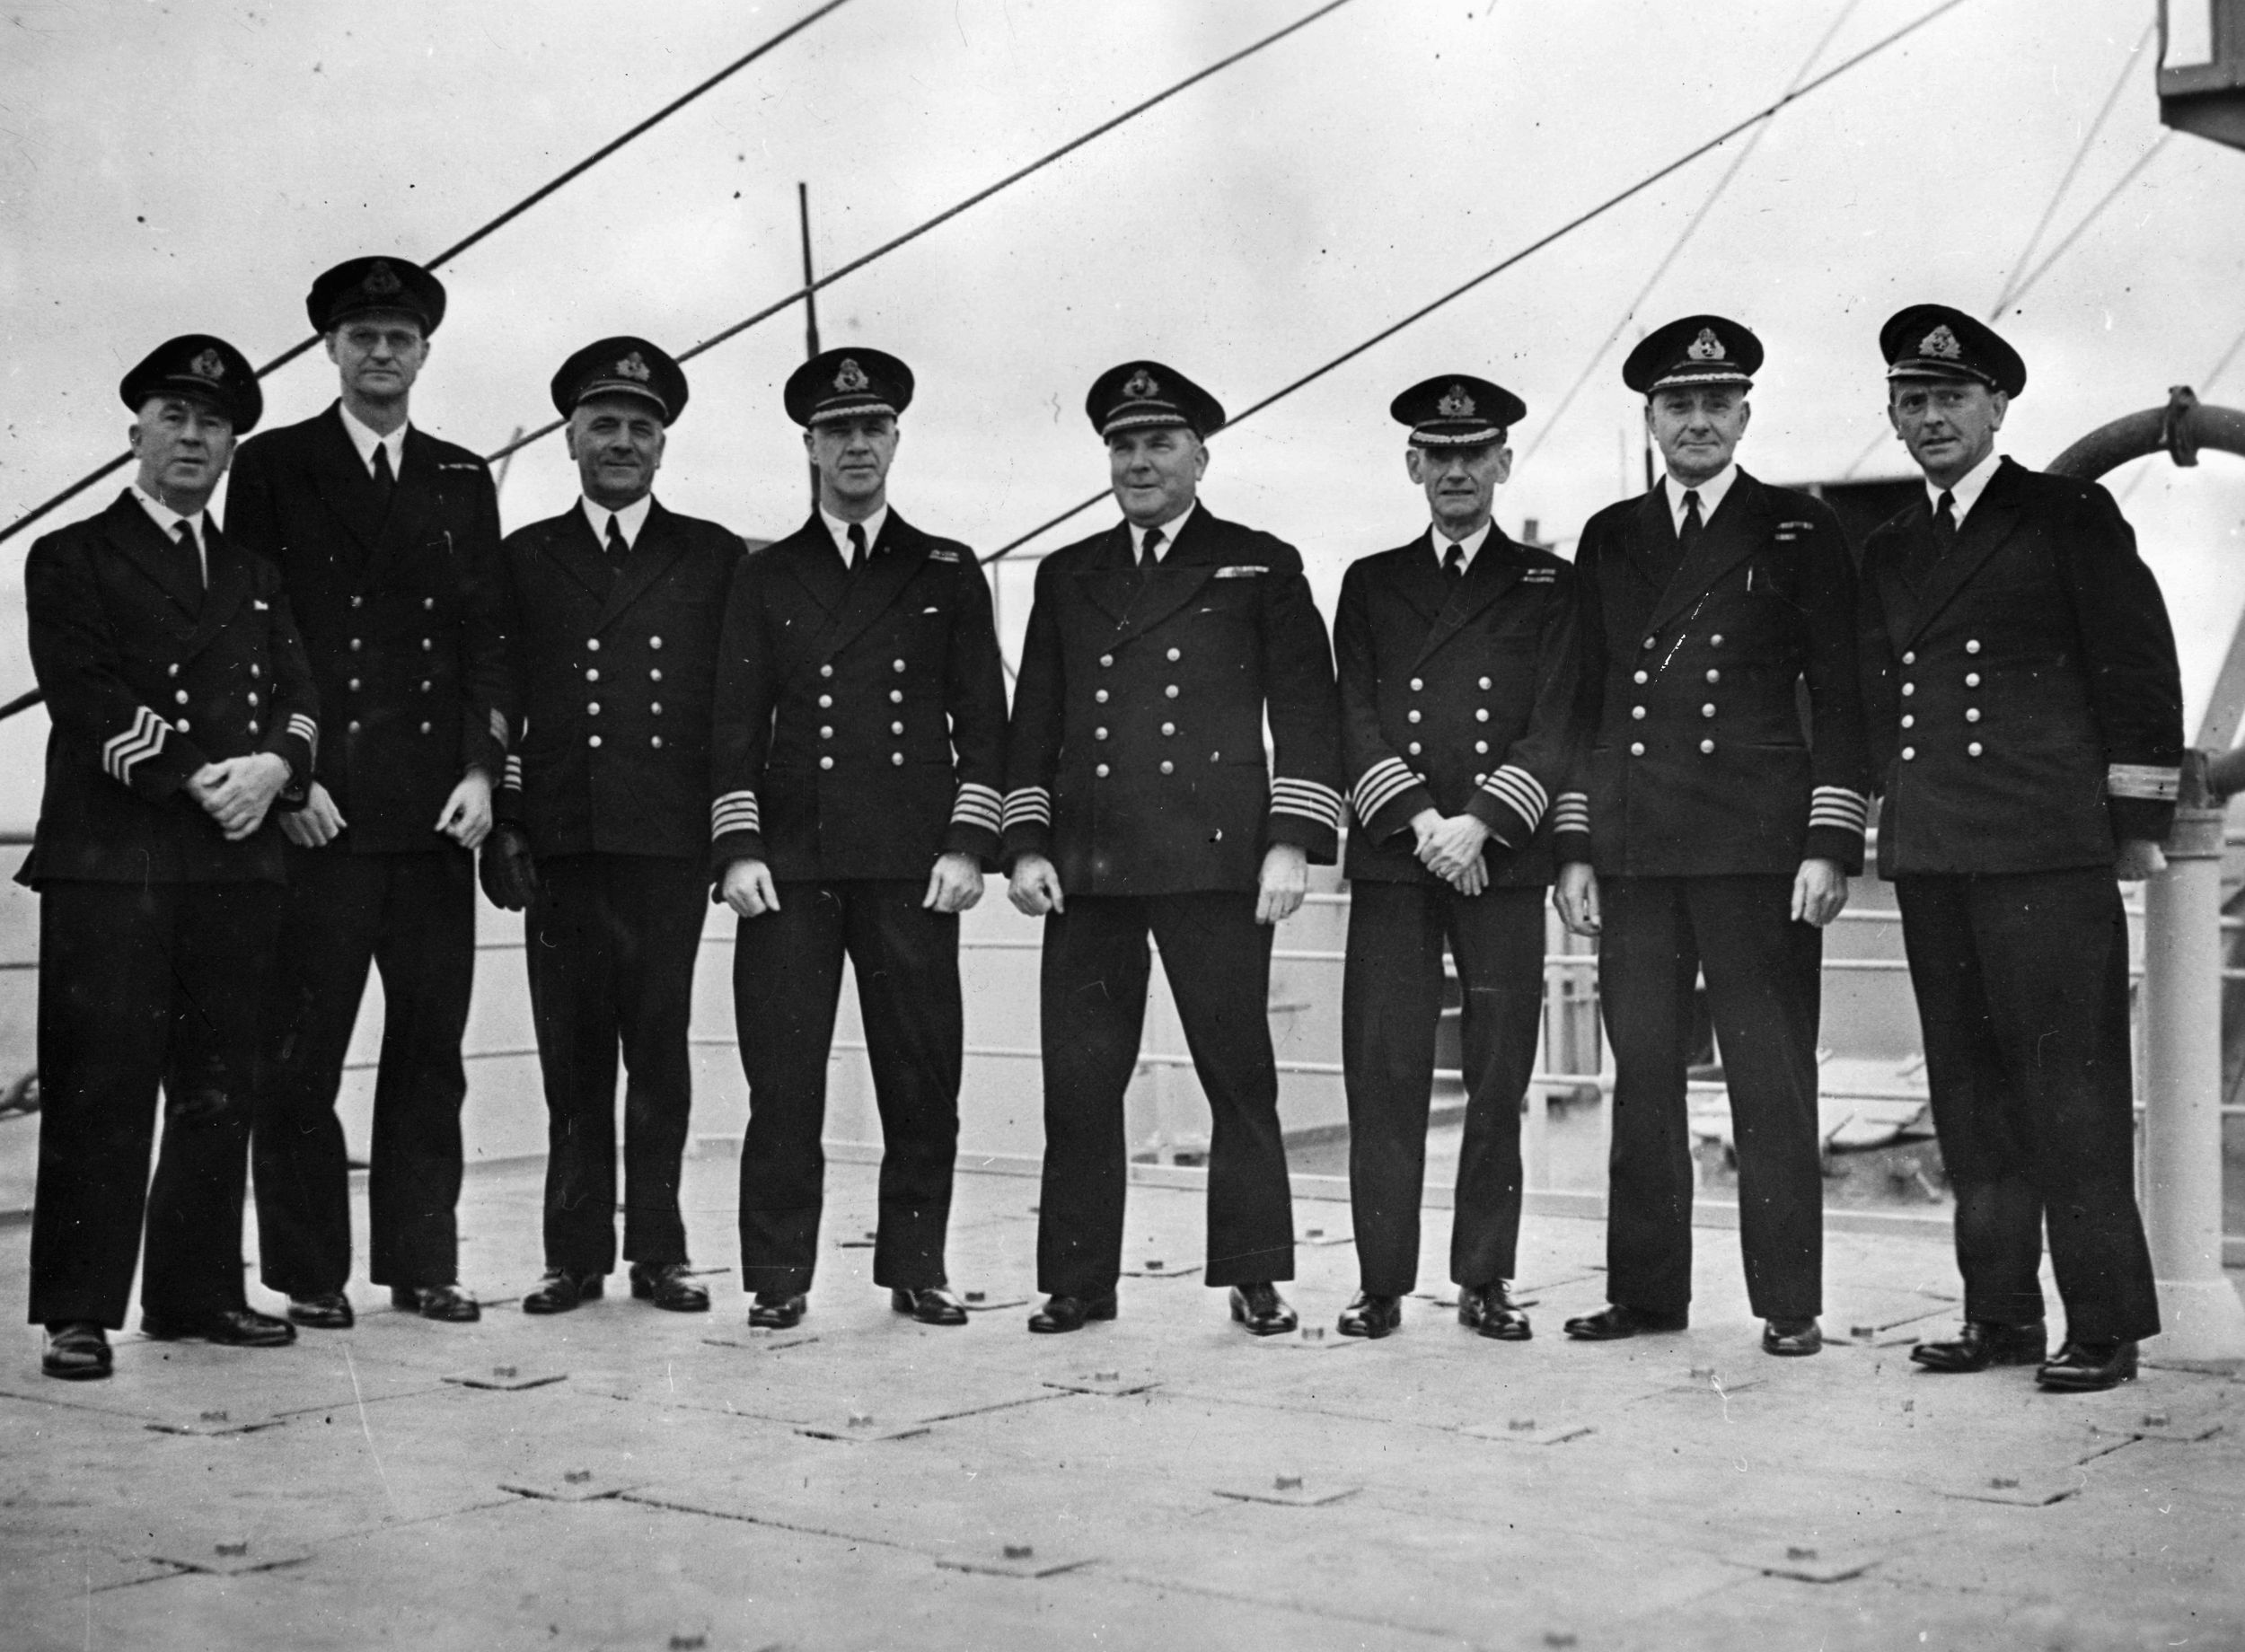 The officers of the Queen Mary pose for a photograph in November 1944. Standing fourth from the right is Captain James C. Bisset.